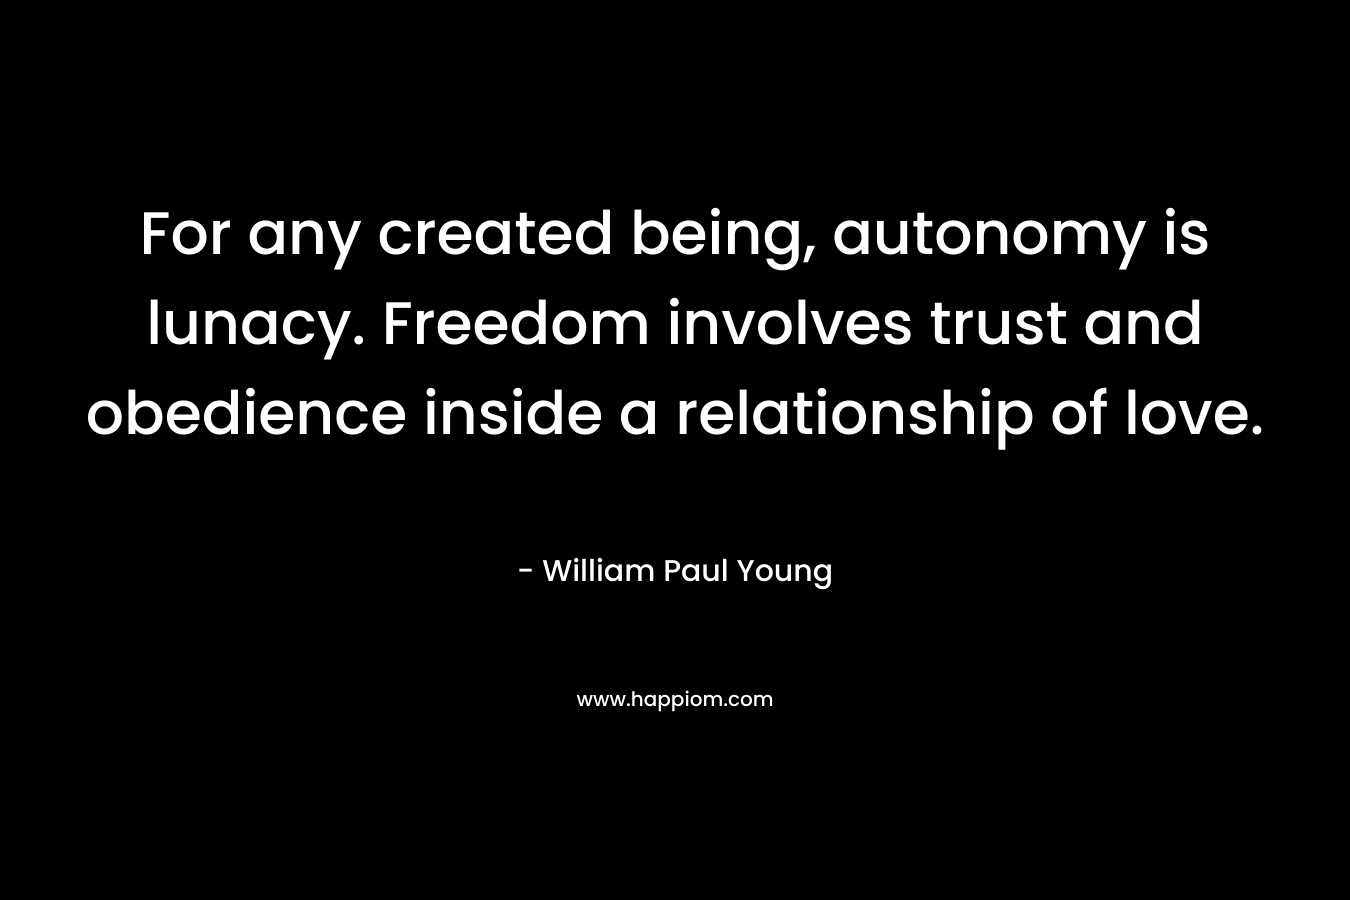 For any created being, autonomy is lunacy. Freedom involves trust and obedience inside a relationship of love. – William Paul Young